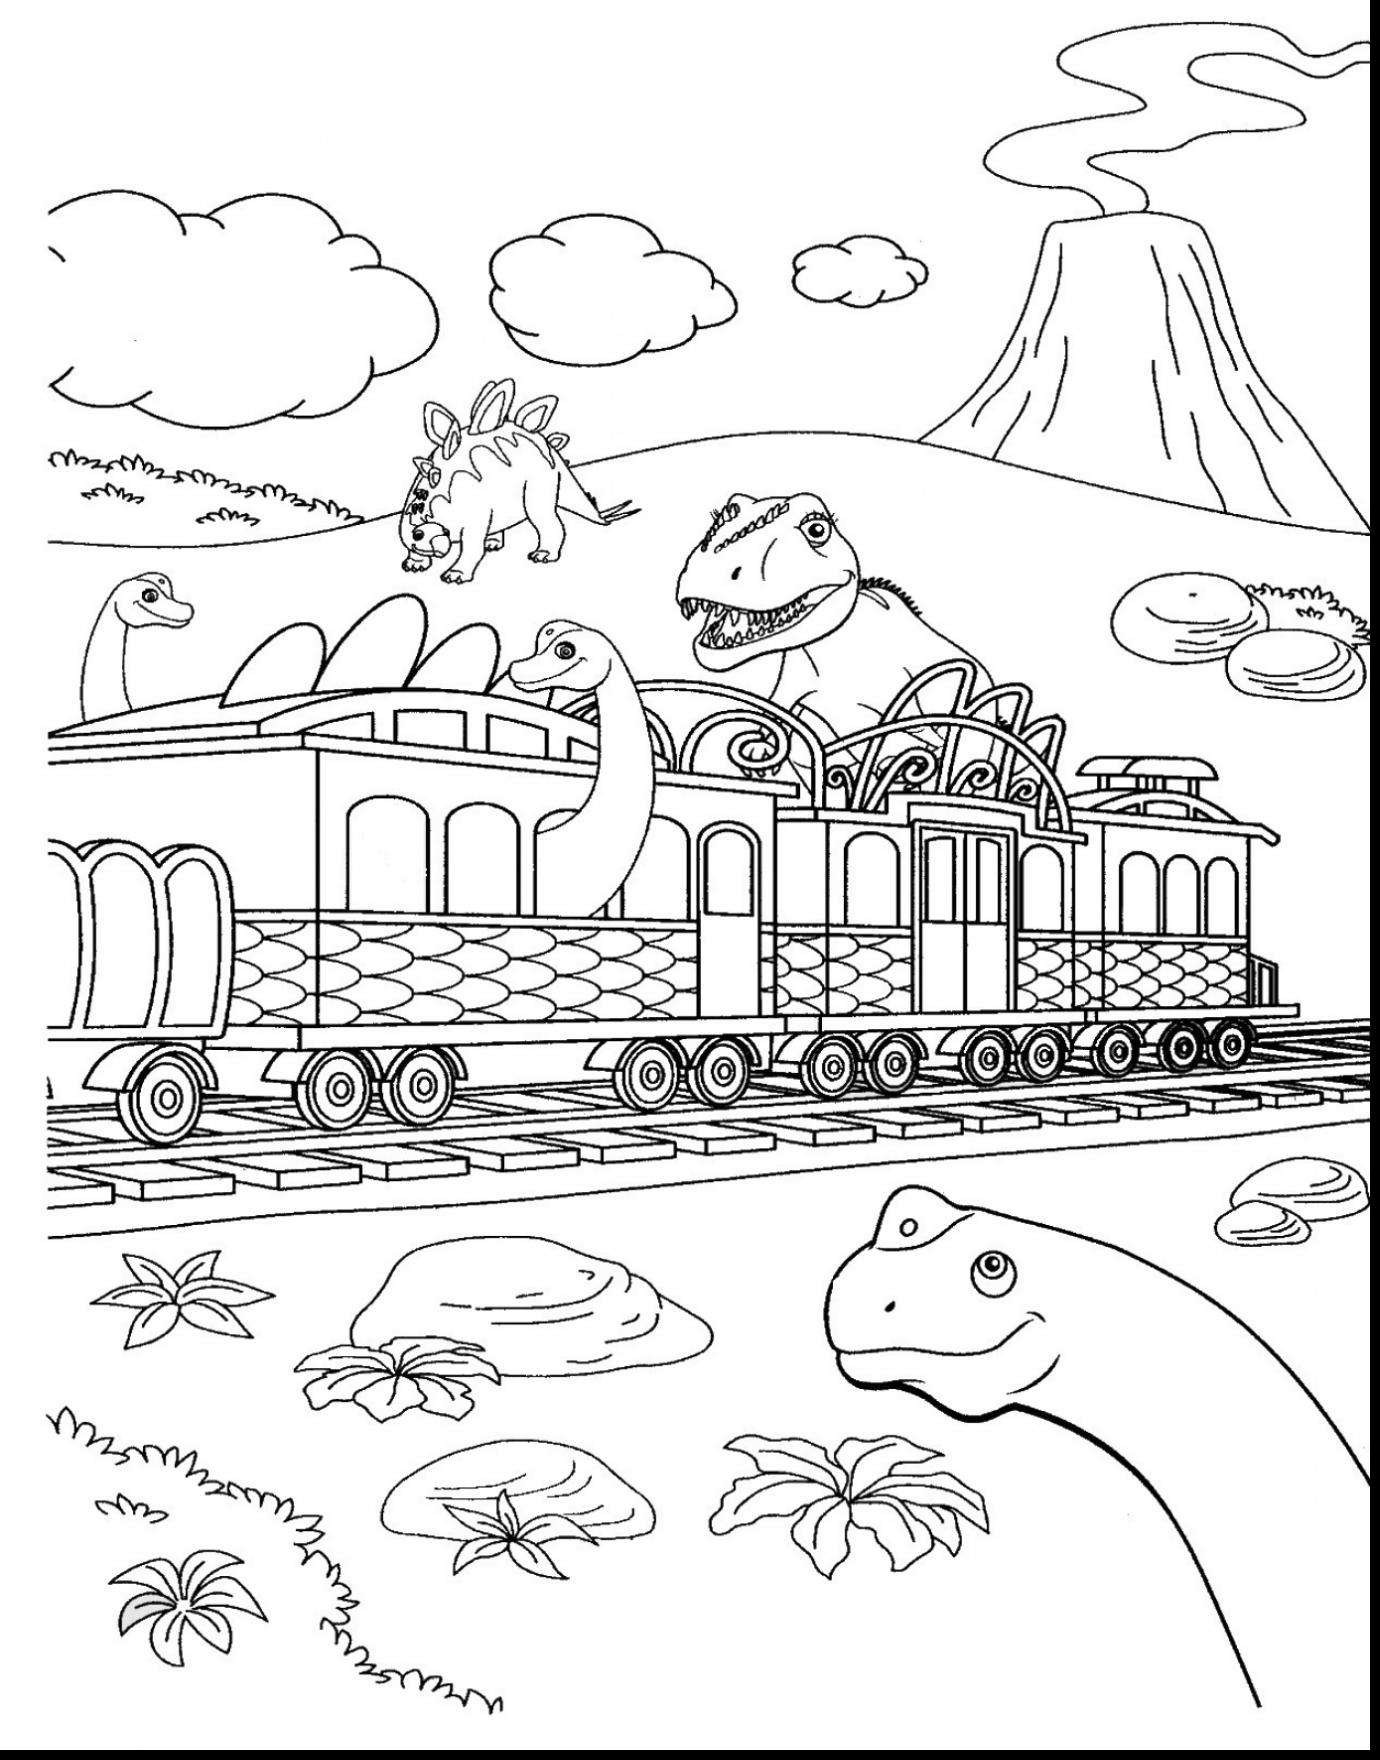 Full Size of Coloring Book And Pages Coloring Book And Pages Astonishing Design Dinosaur Train